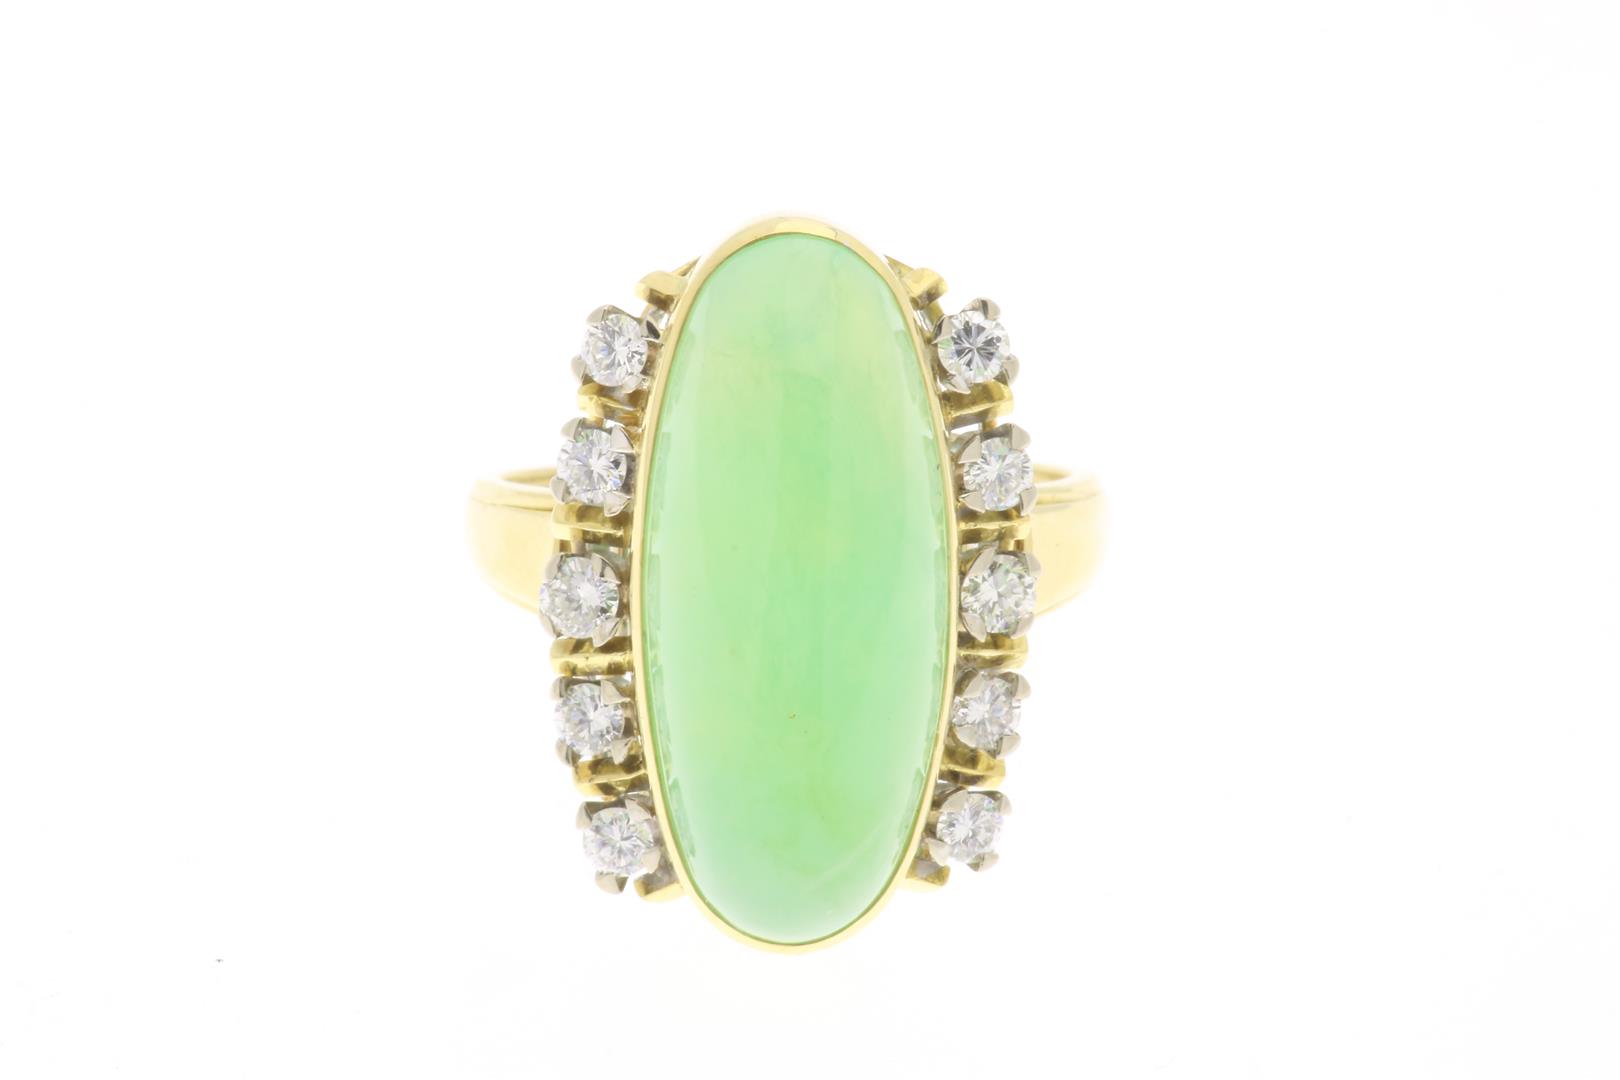 Bicolor gold marquis ring set with cabochon chrysoprase and diamond, brilliant cut, approximately